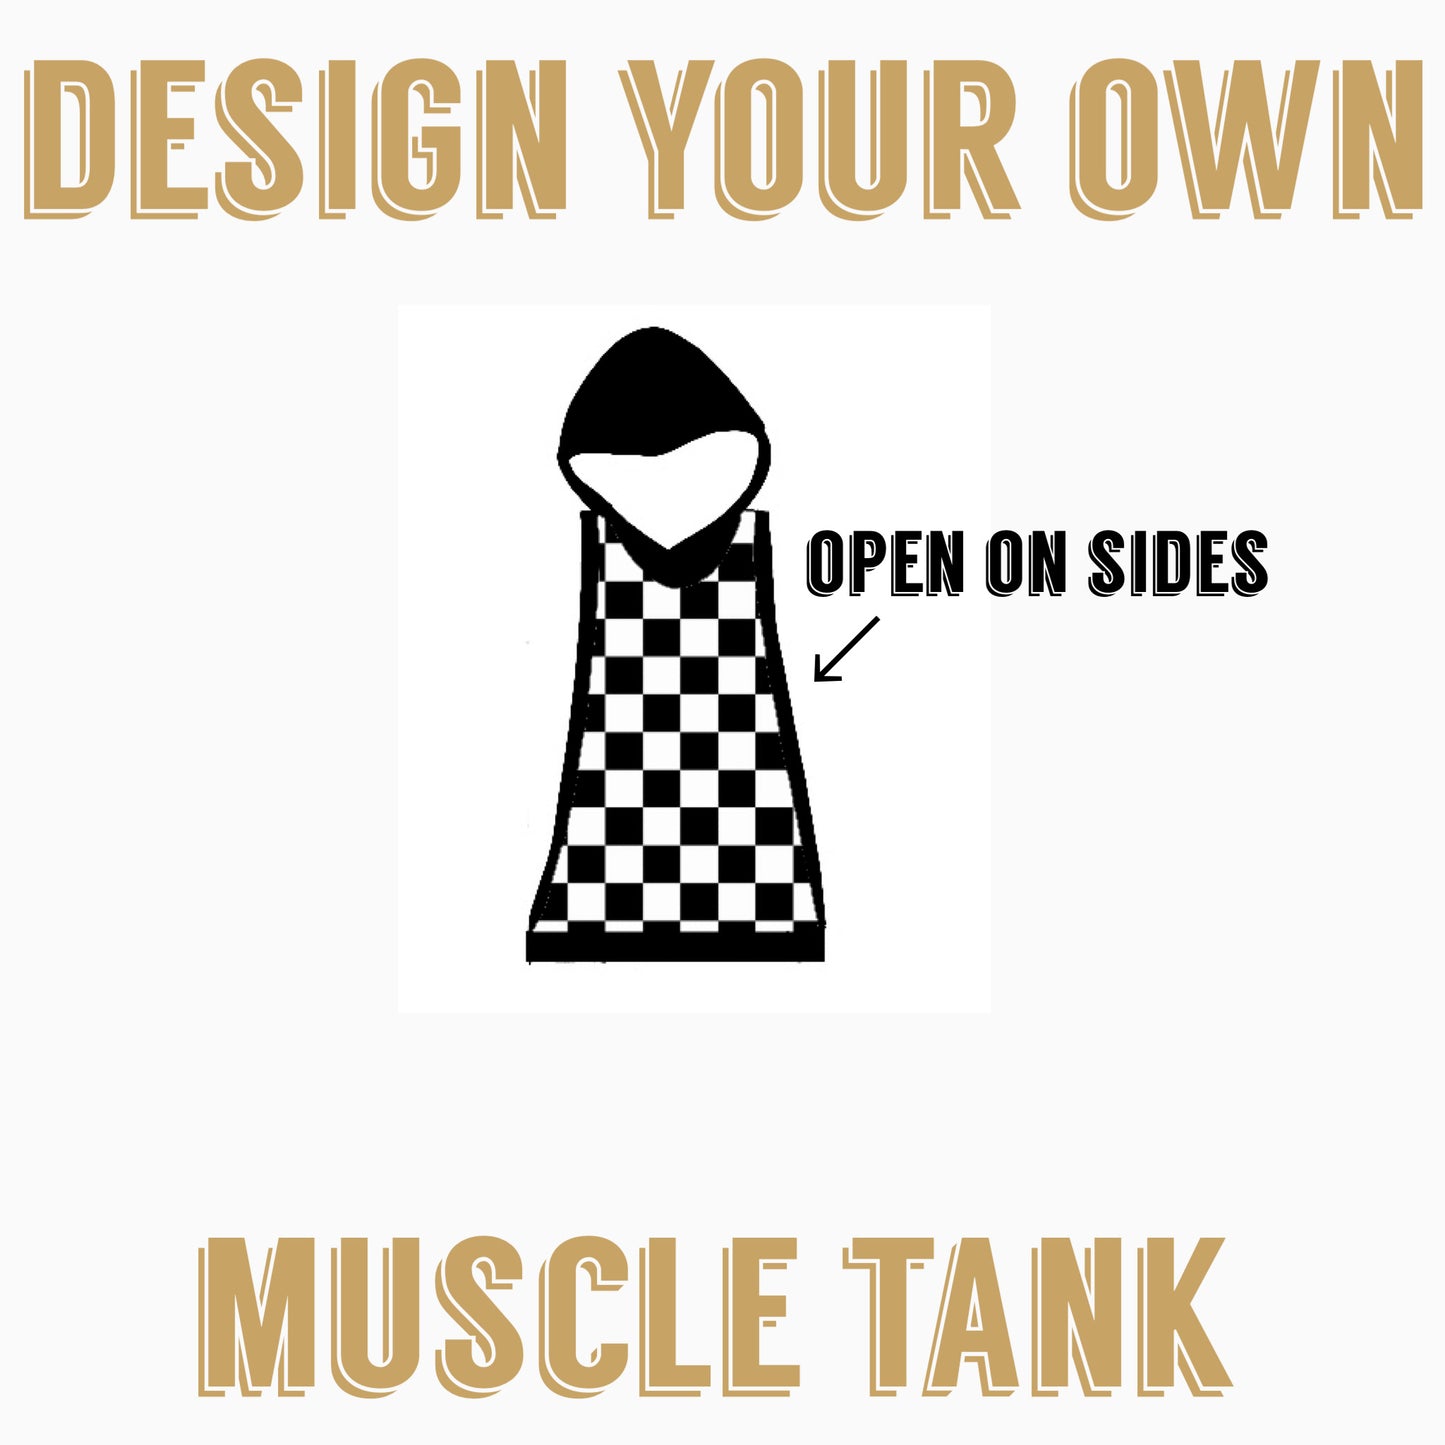 Design Your Own| Muscle Tank